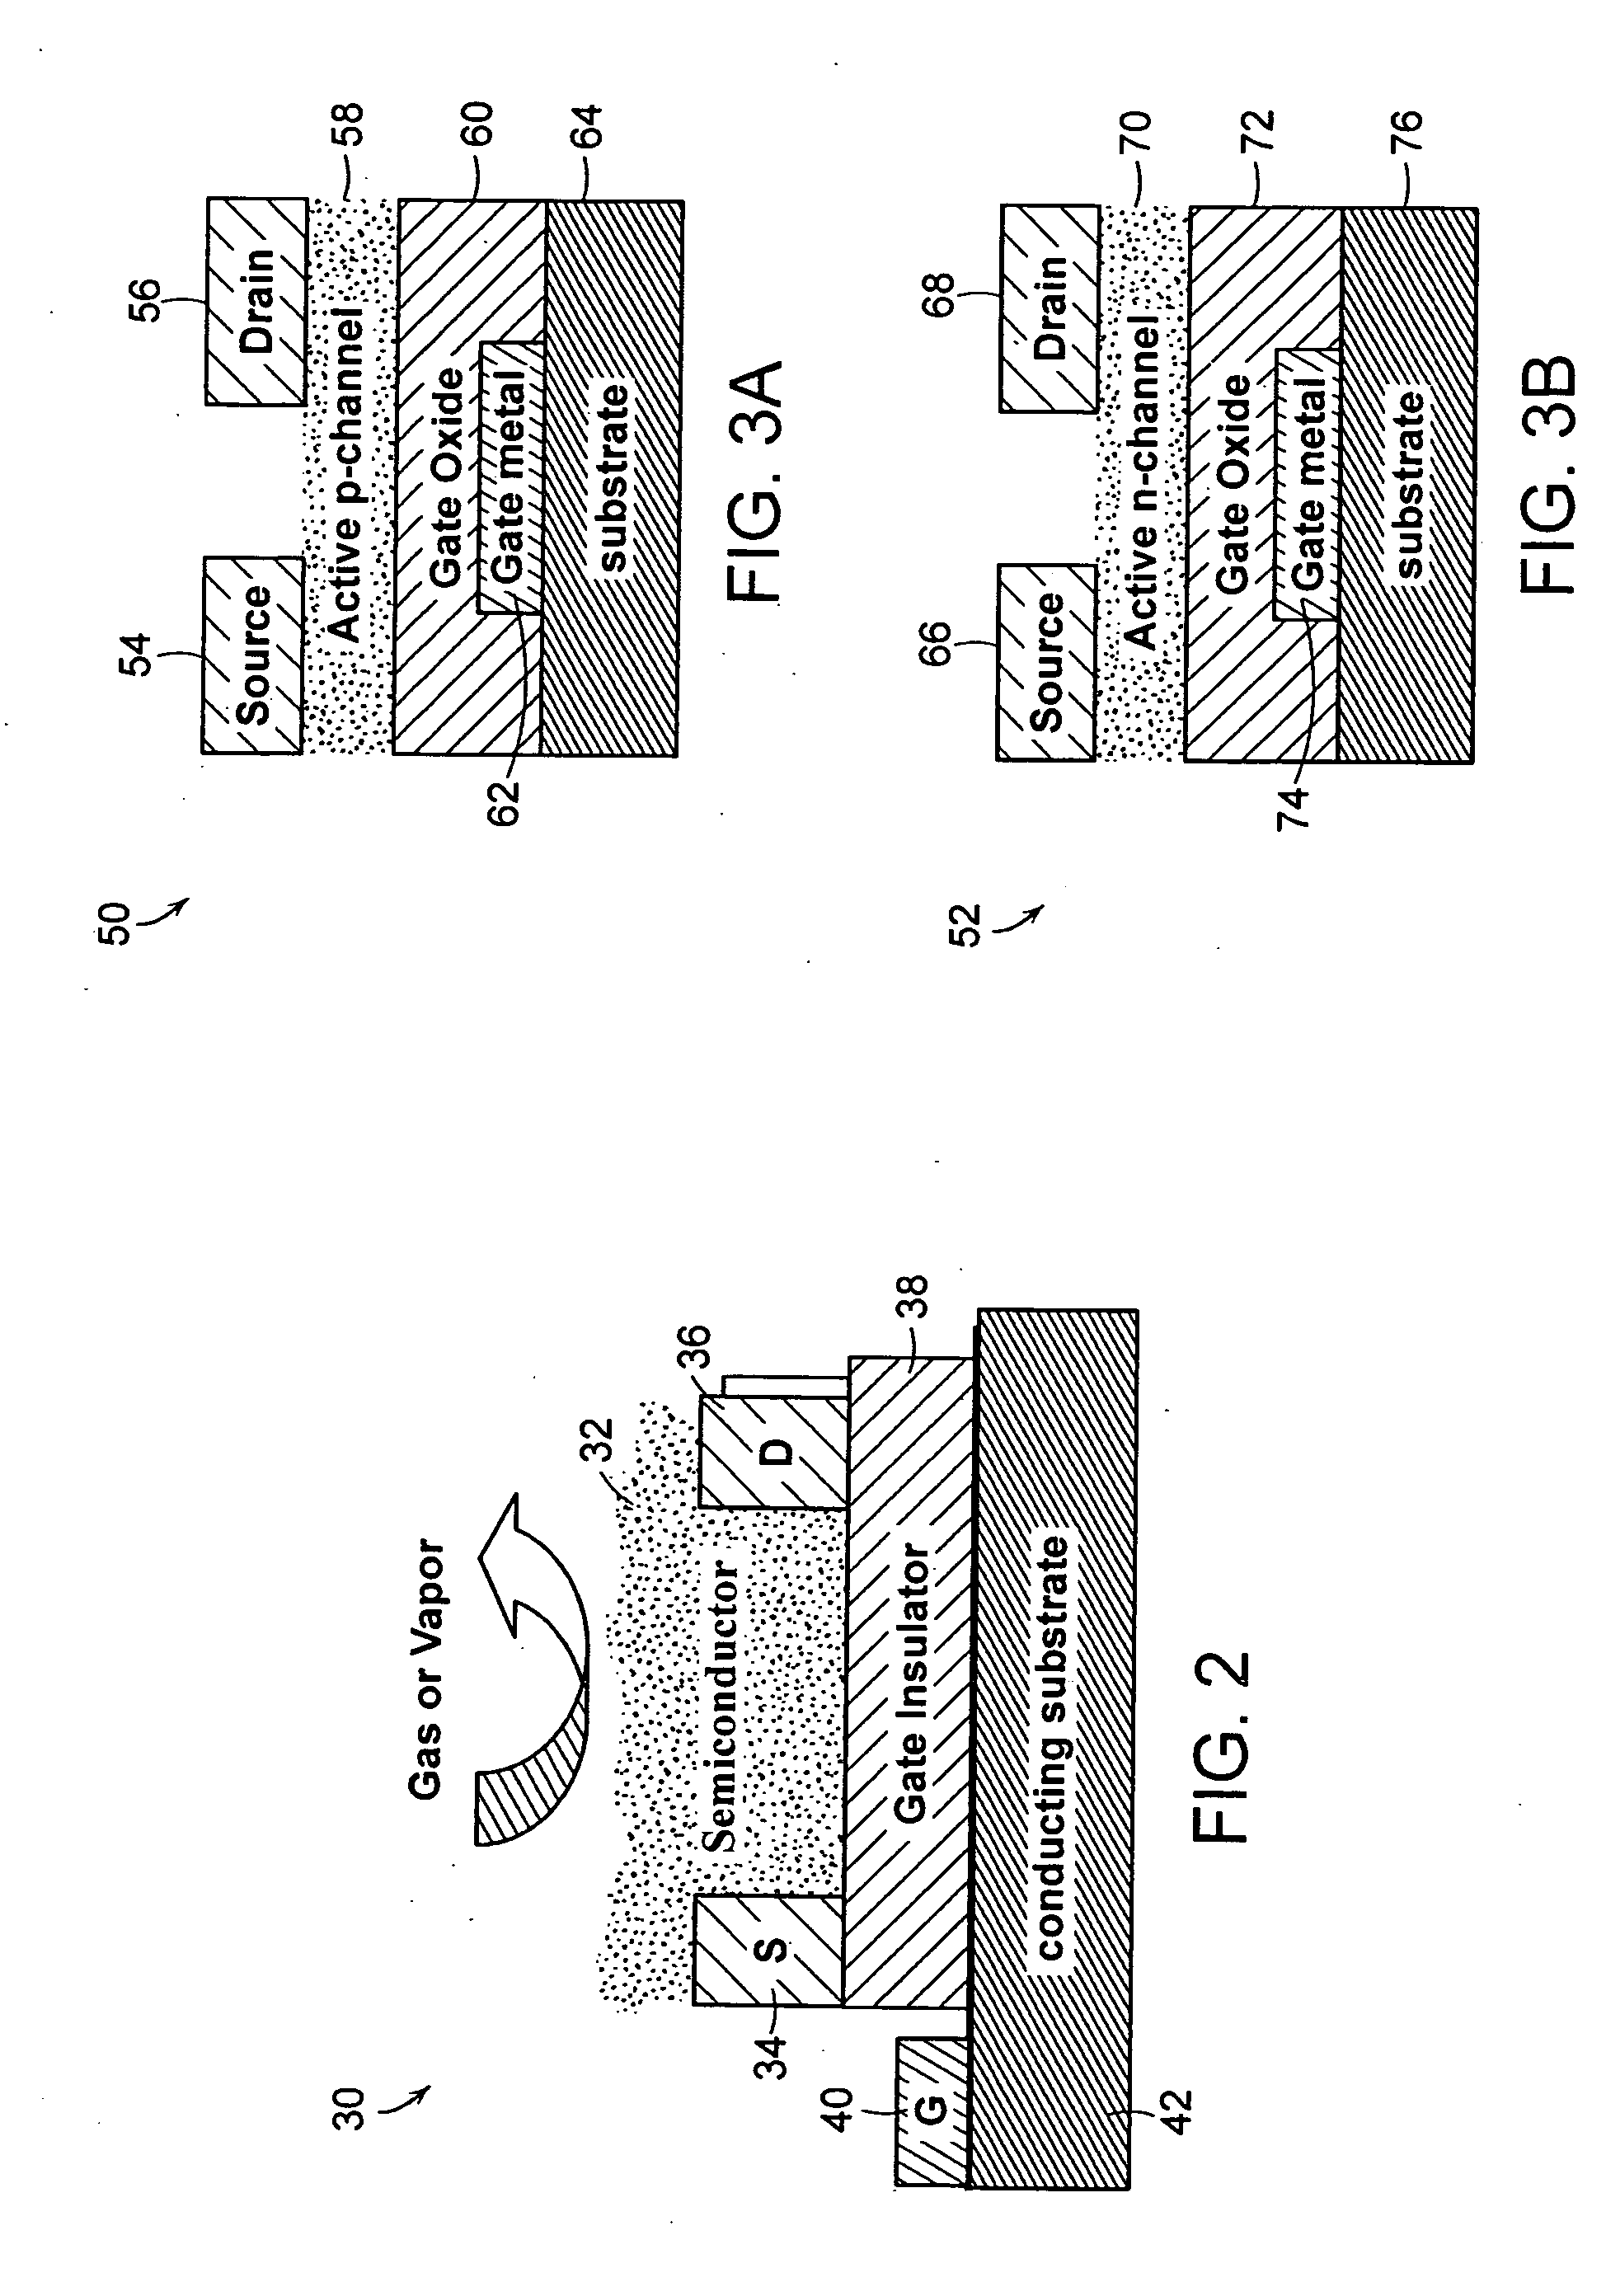 Low voltage flexible organic/transparent transistor for selective gas sensing, photodetecting and CMOS device applications